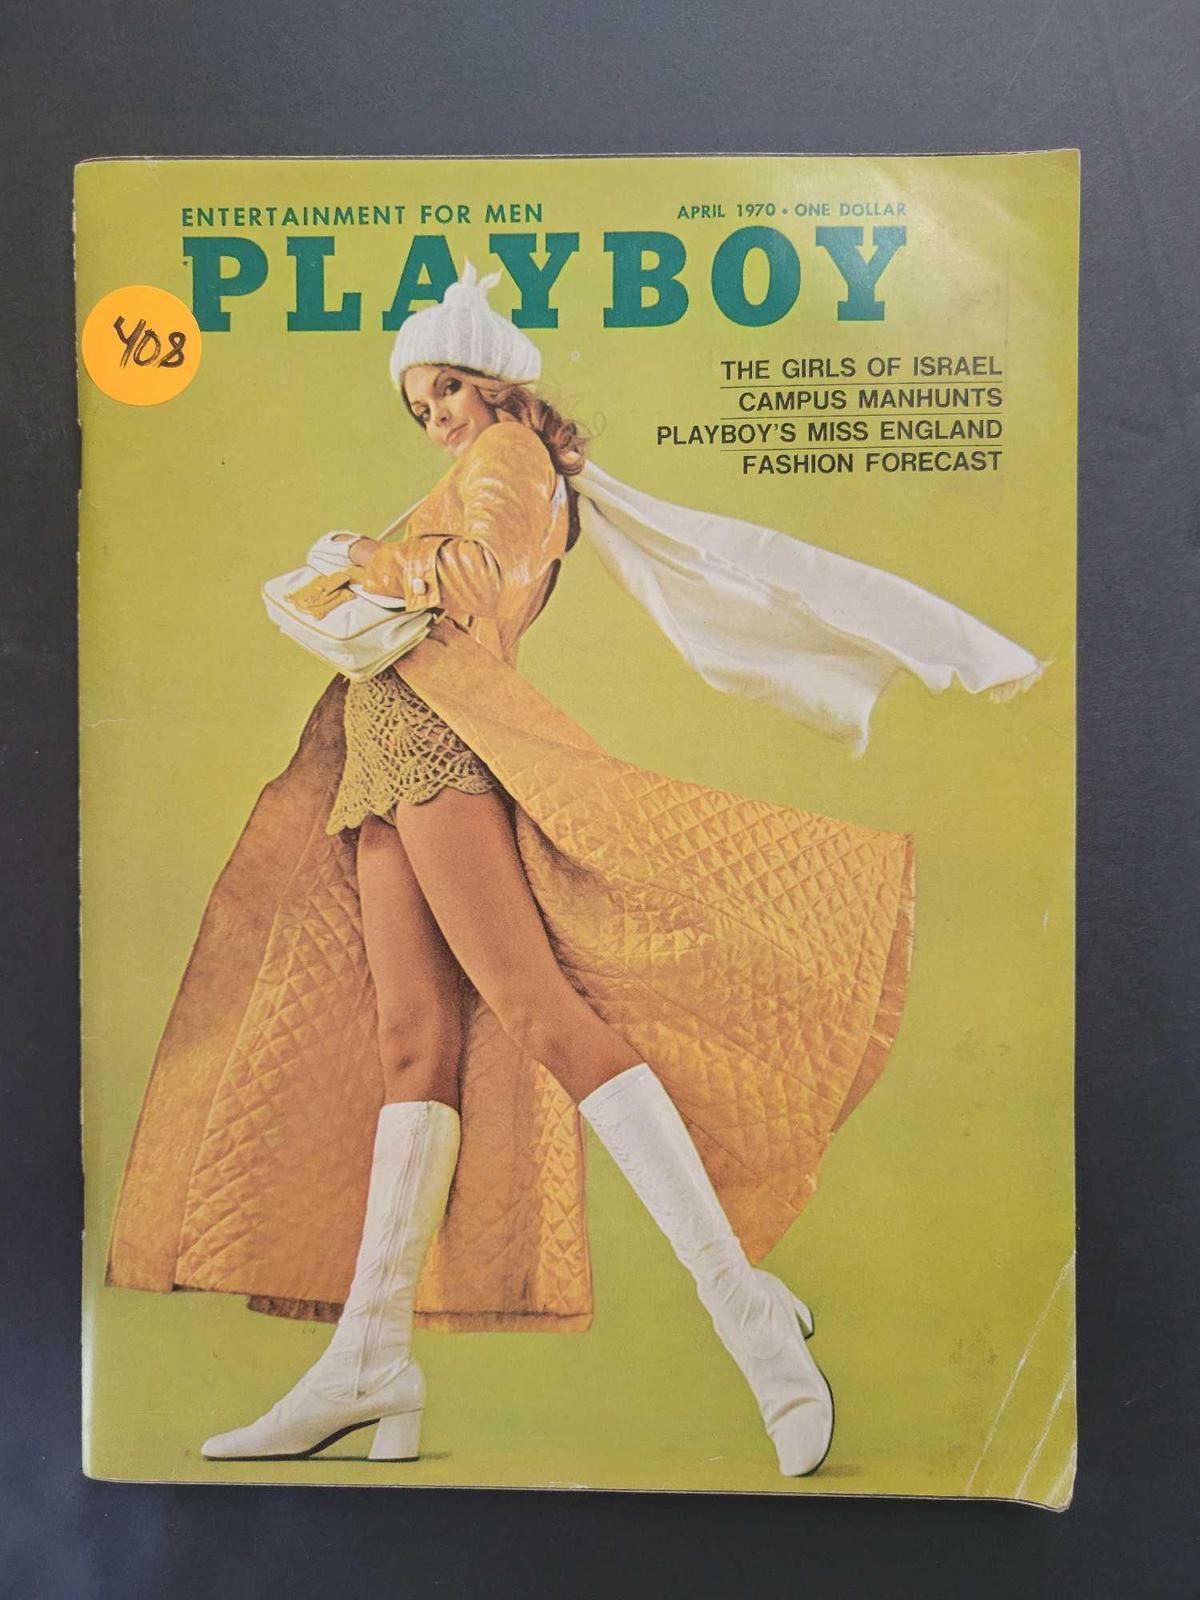 ADULTS ONLY! Vintage Playboy April 1970 $1 STS